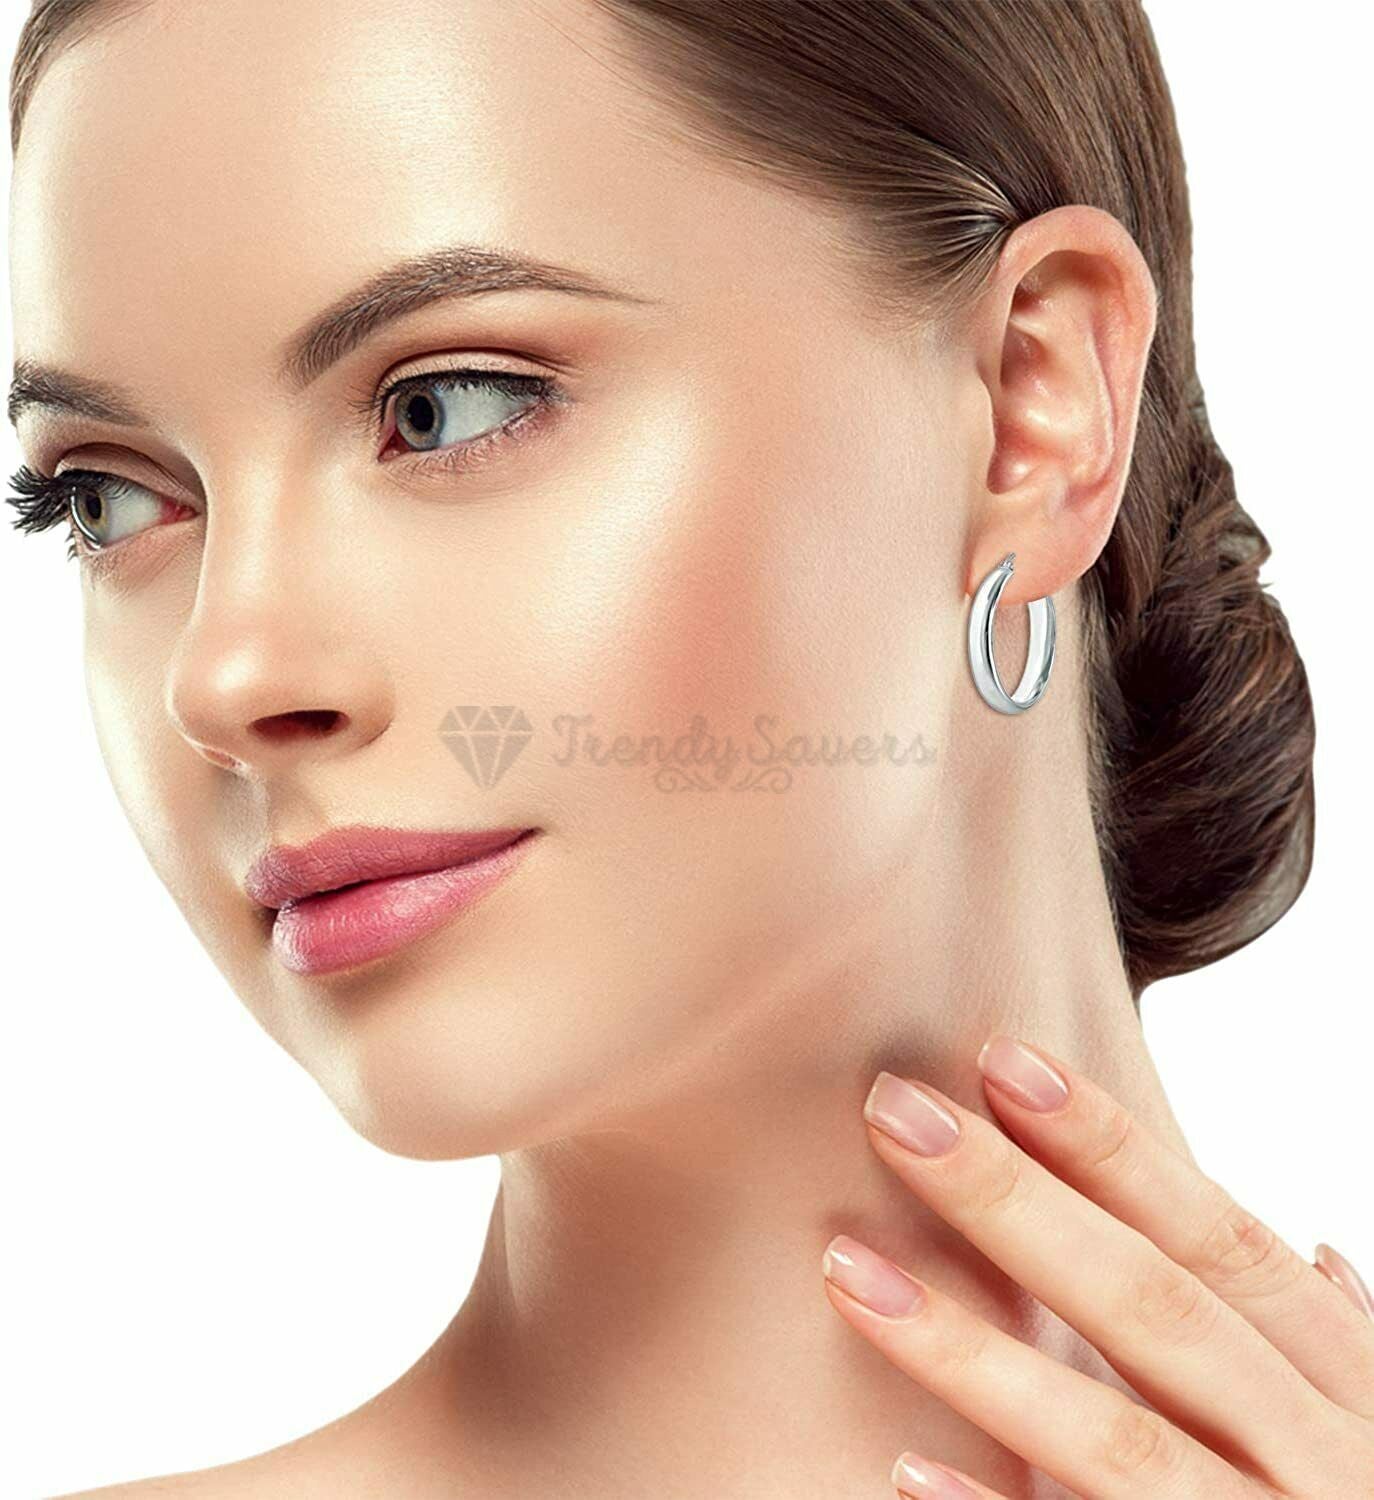 Hypoallergenic Sterling Silver Filled Hoop Huggie Thick Cartilage Fashion Earrings